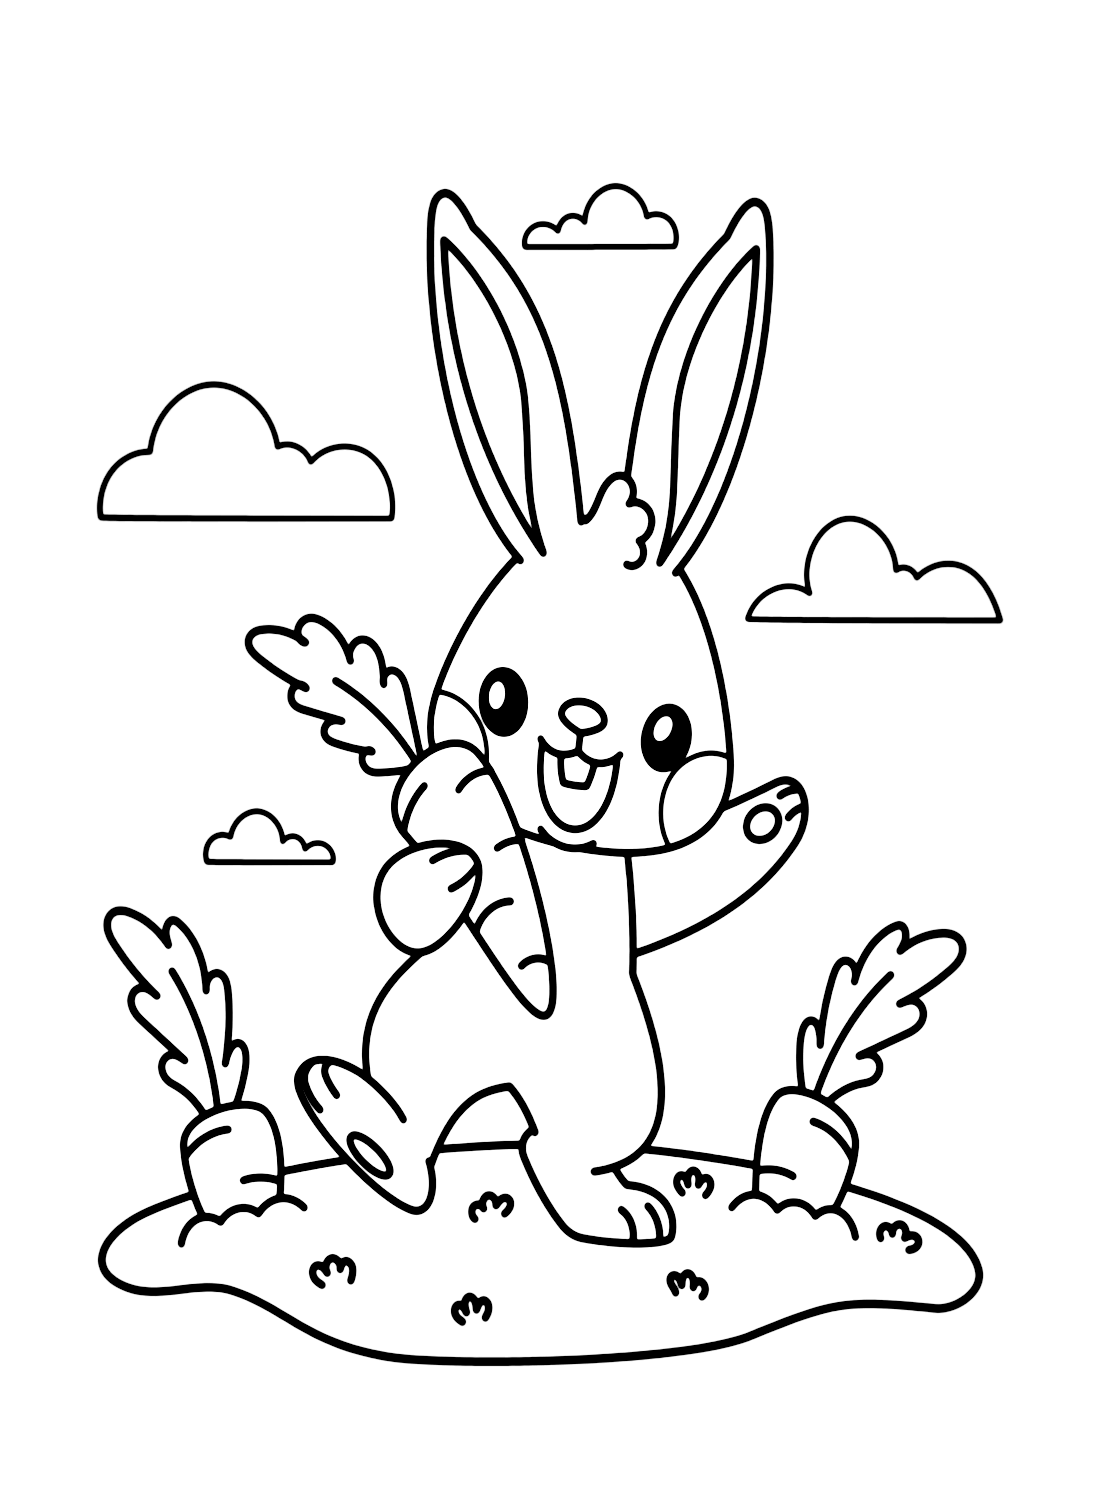 Cute Rabbit and Carrot Coloring Page PDF - Free Printable Coloring Pages